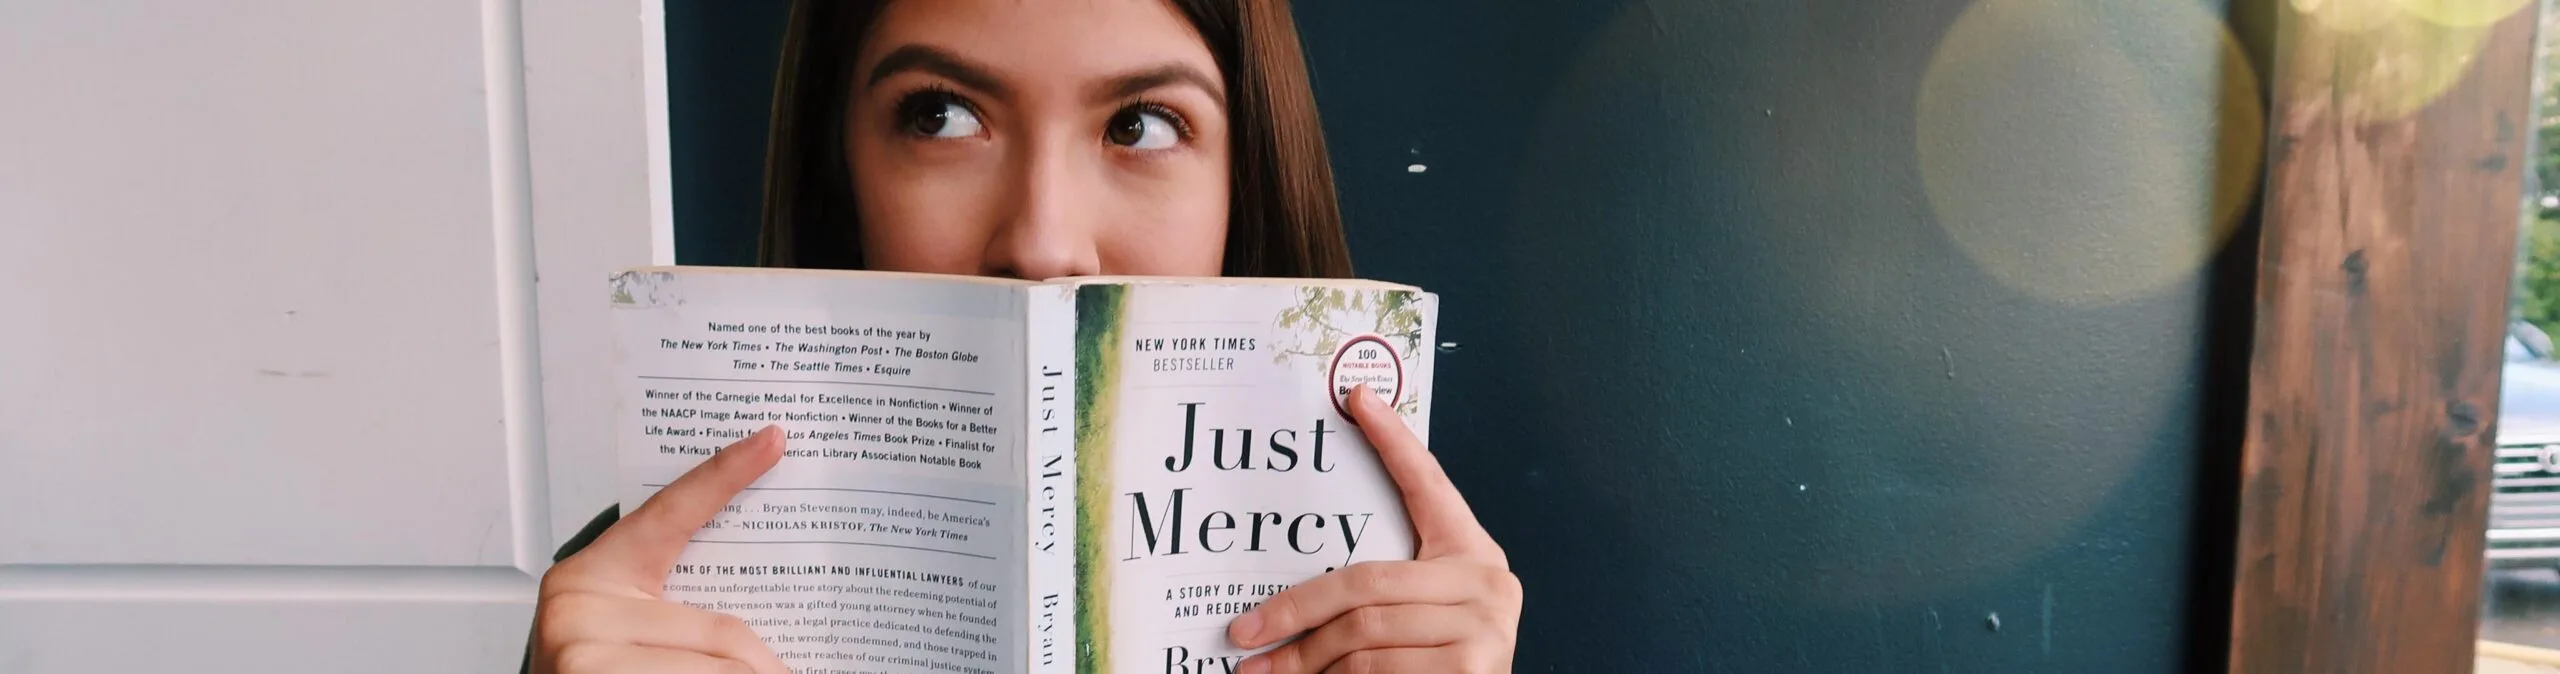 A woman hiding her face with a book named "Just Mercy".